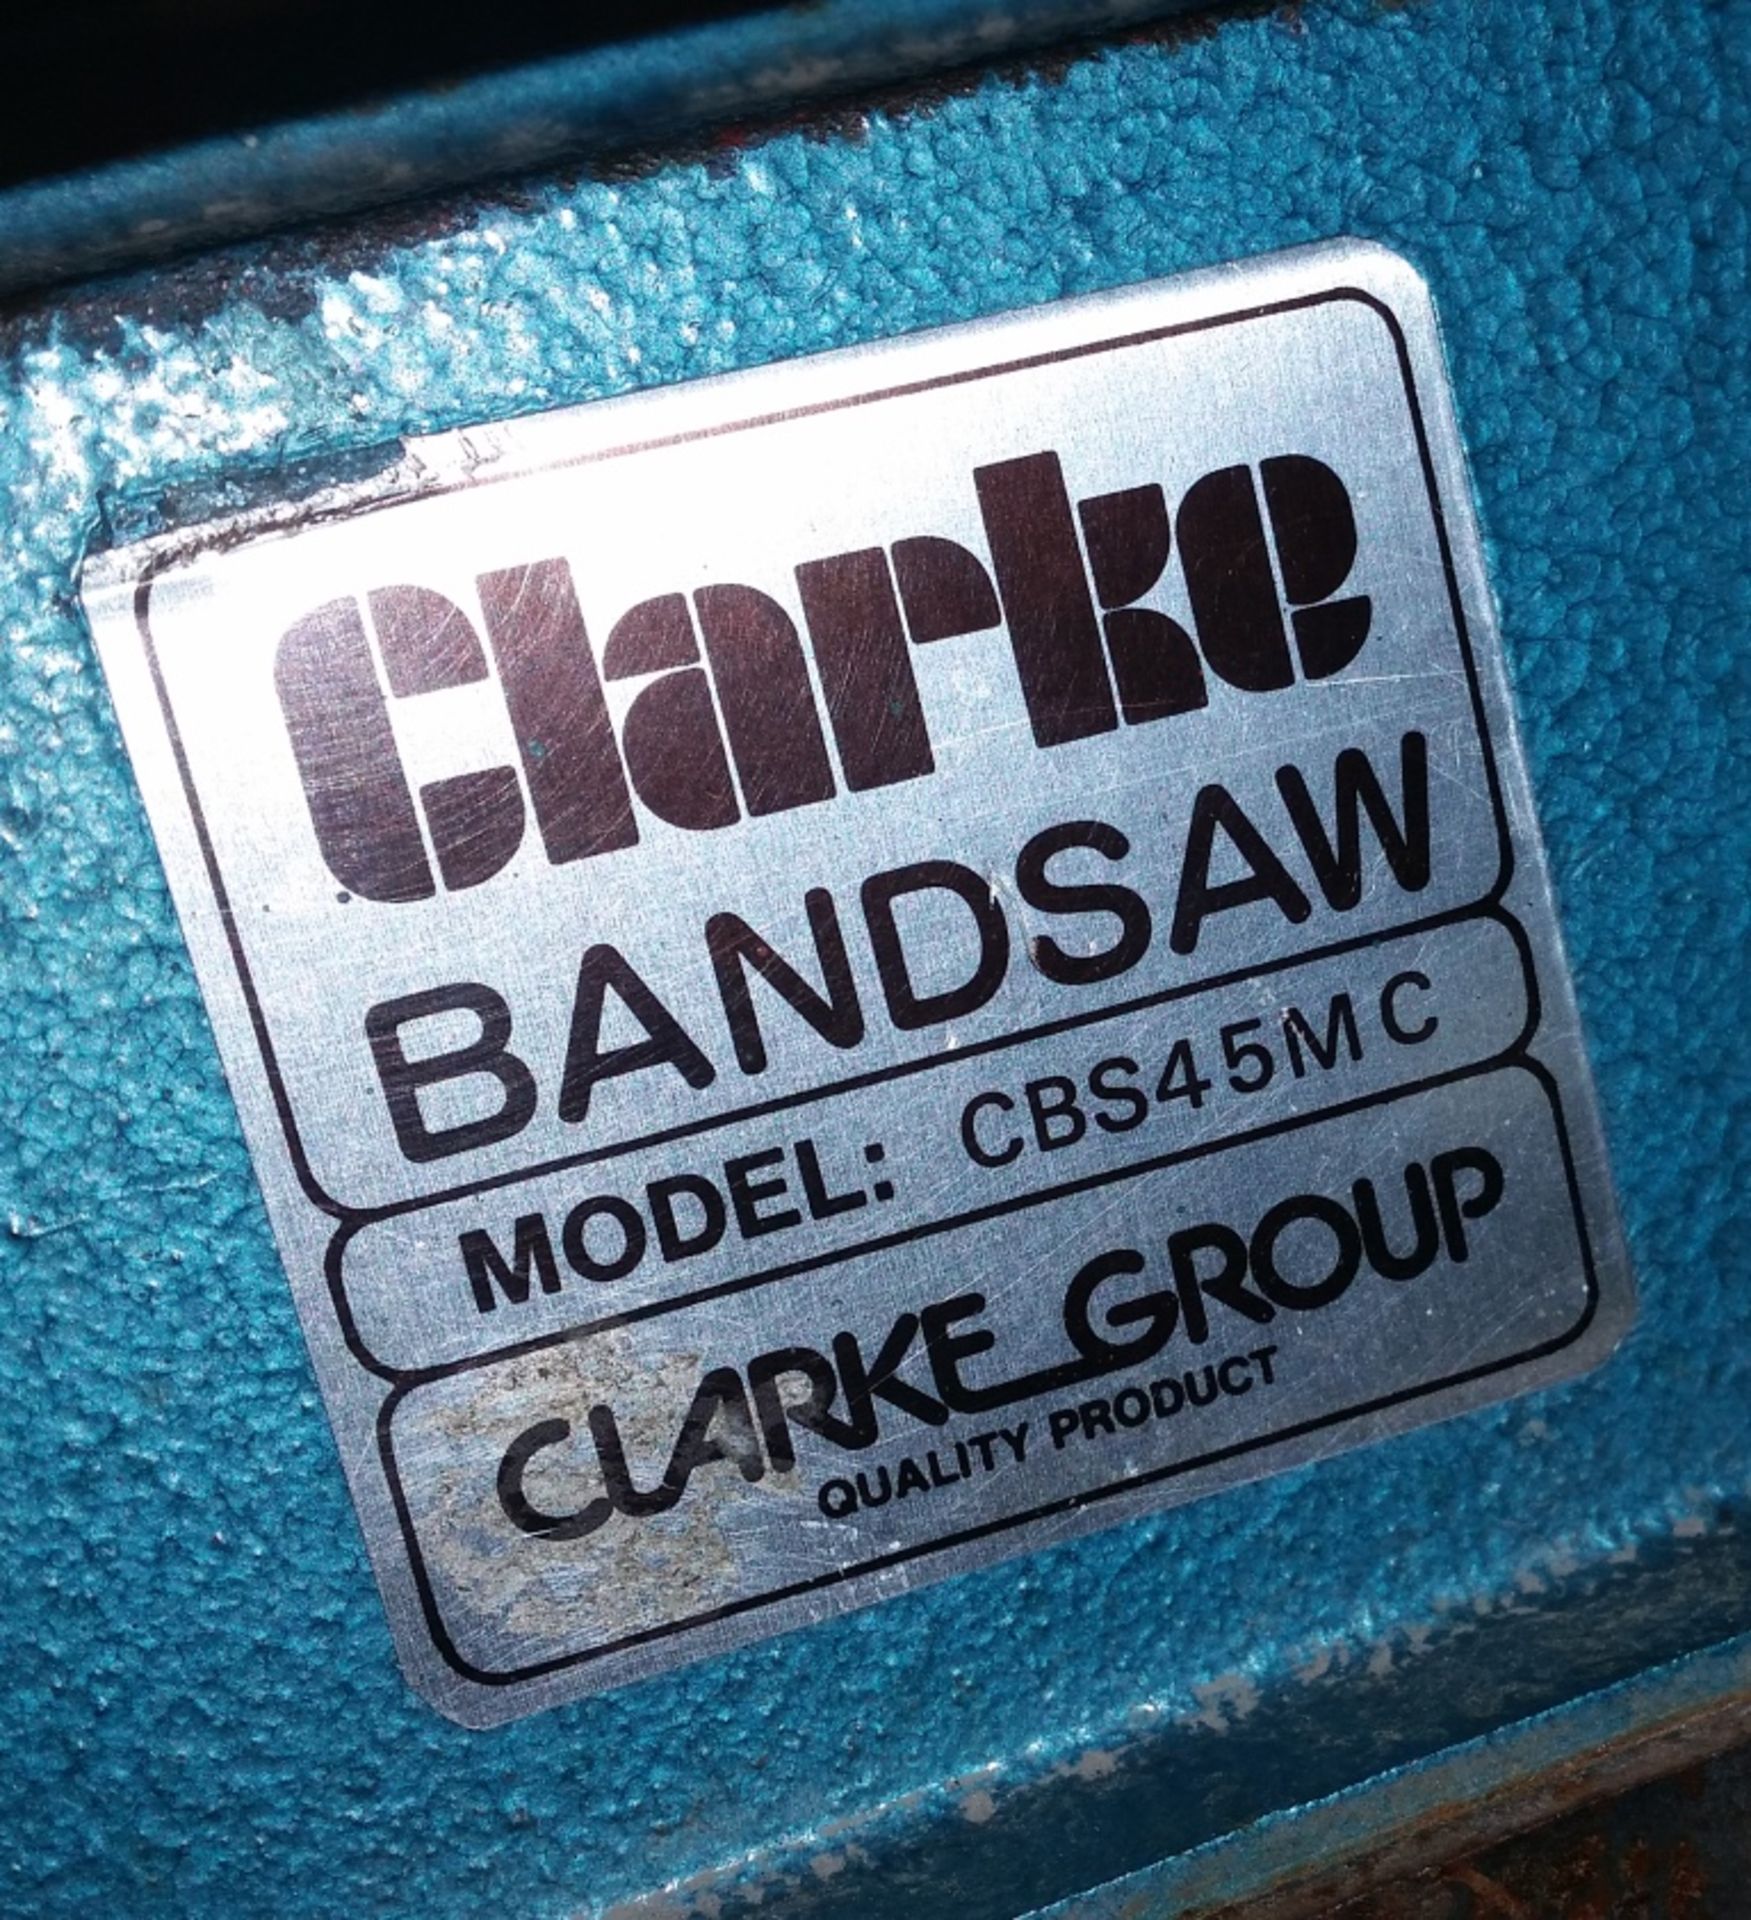 Clarke Reciprocating saw - Image 2 of 2